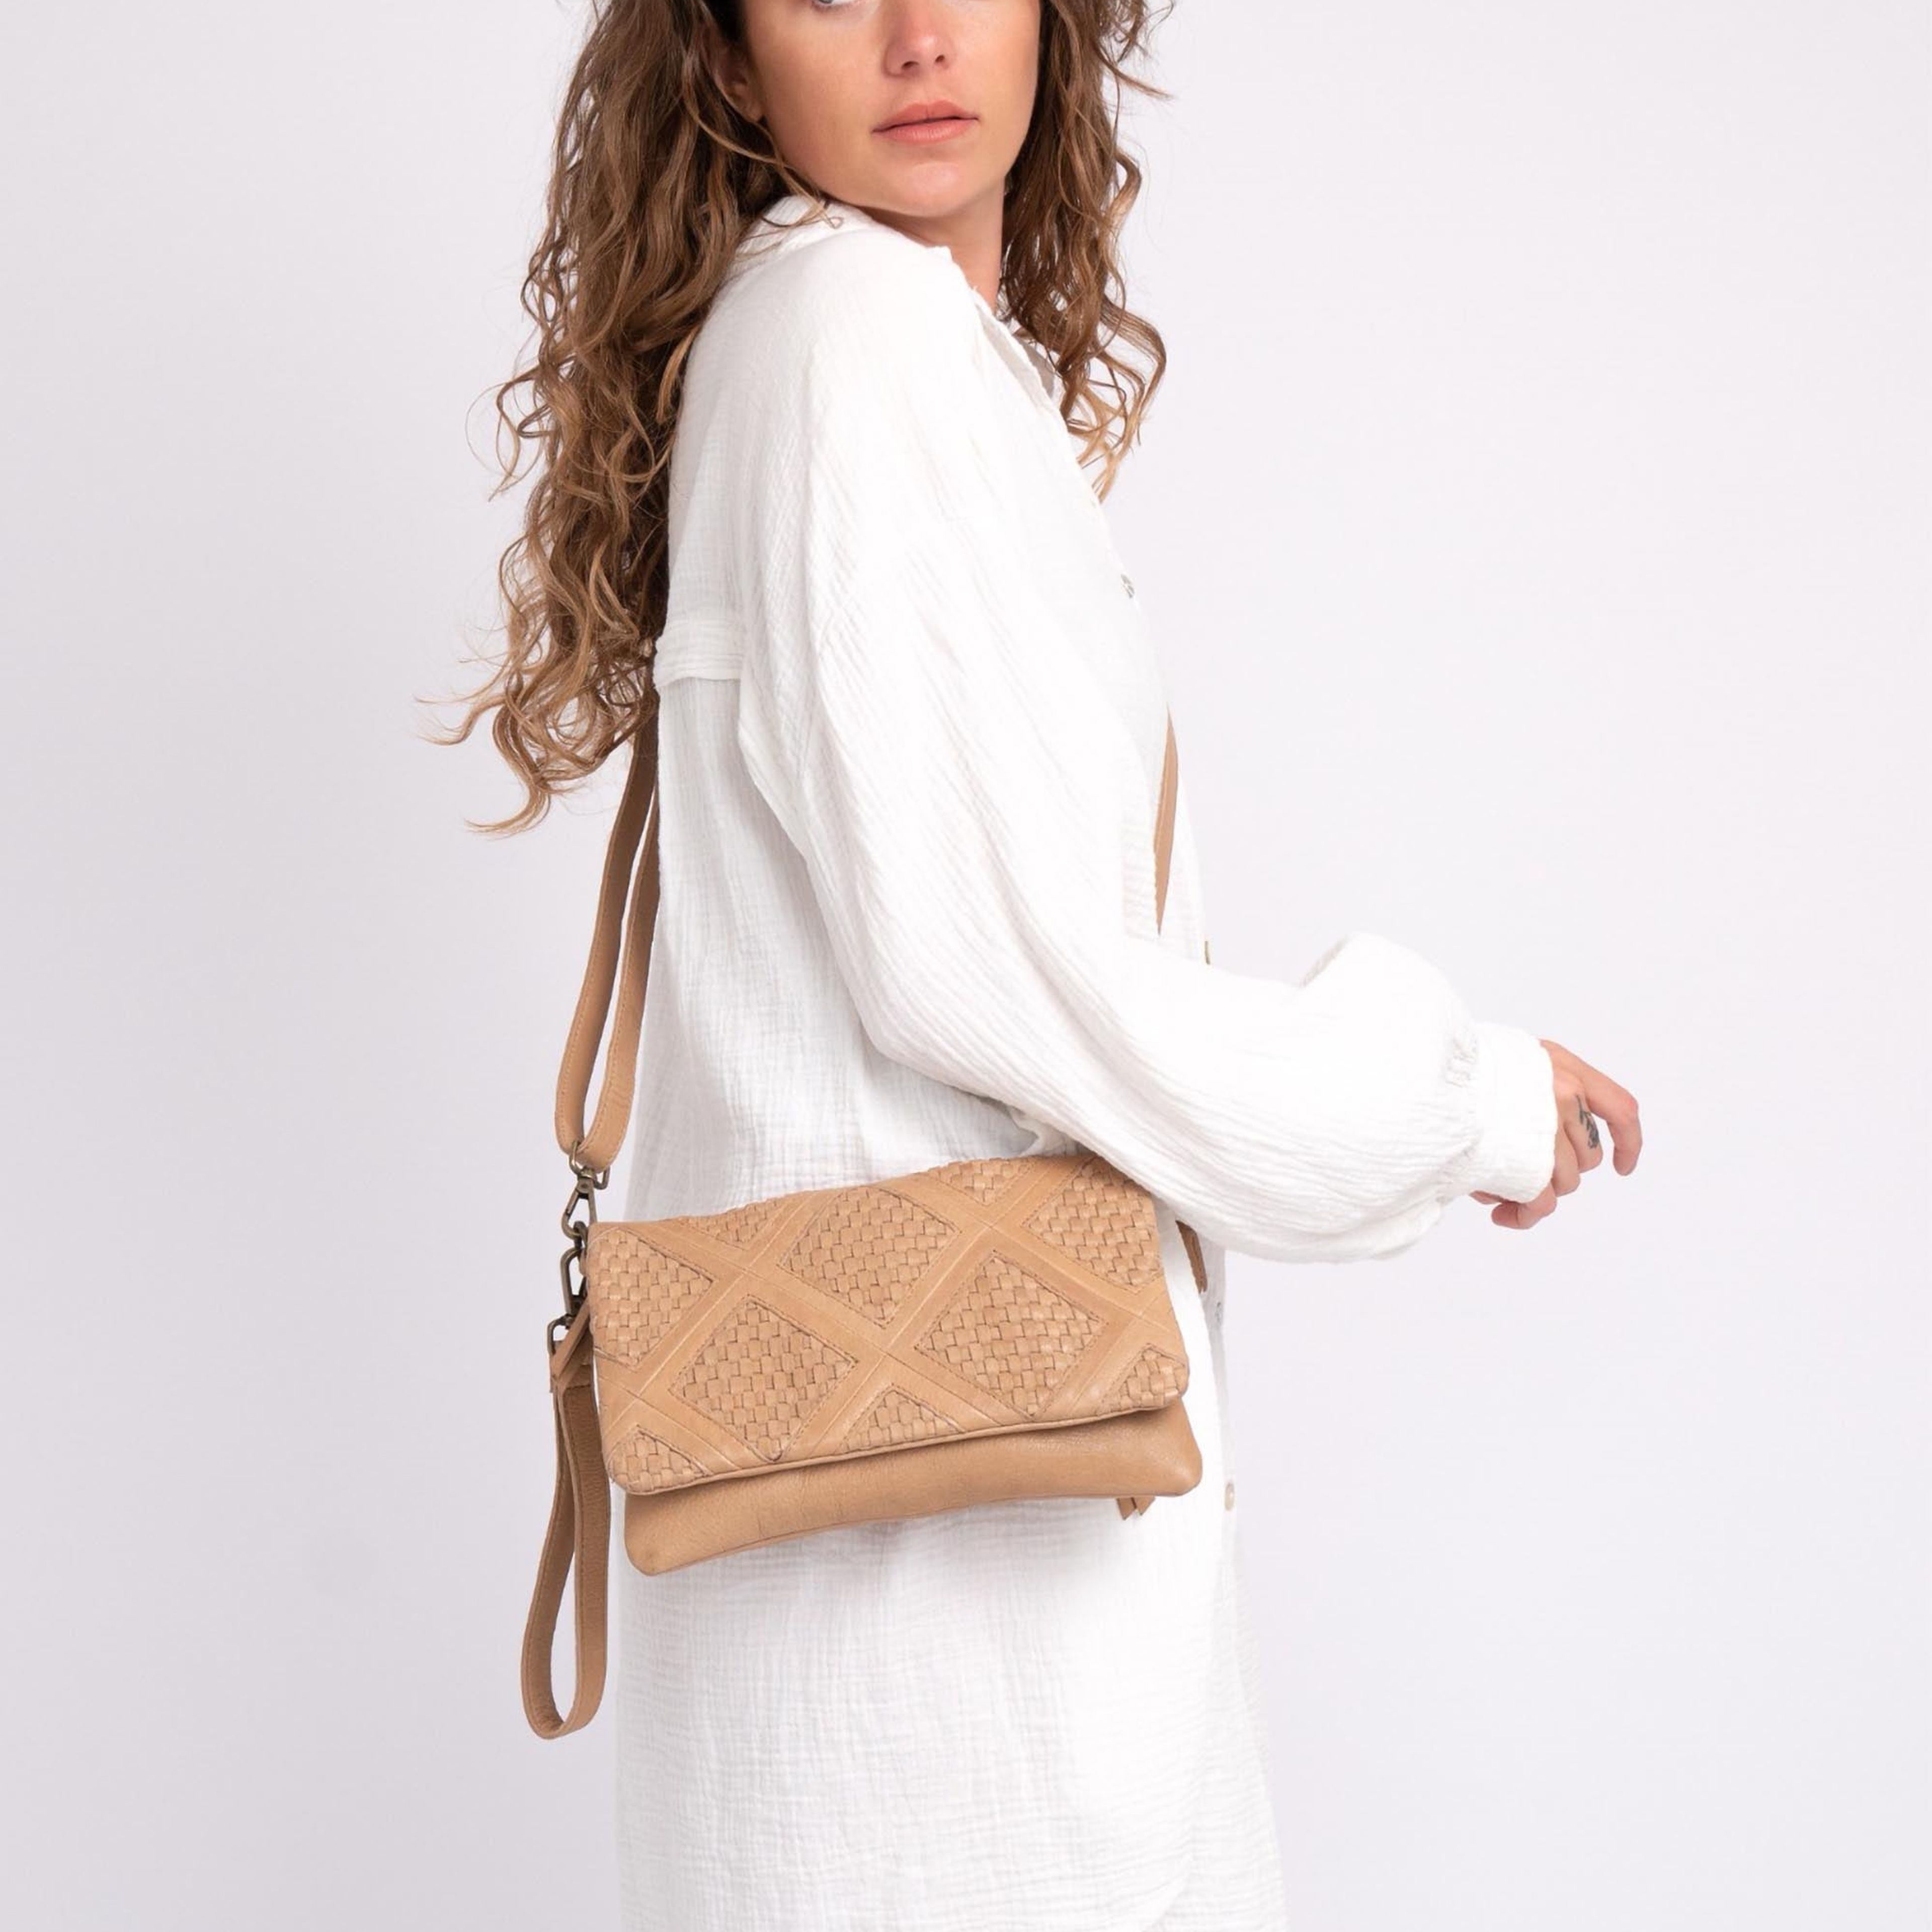 Michels | Bohemian Leather Fold-Over Bag